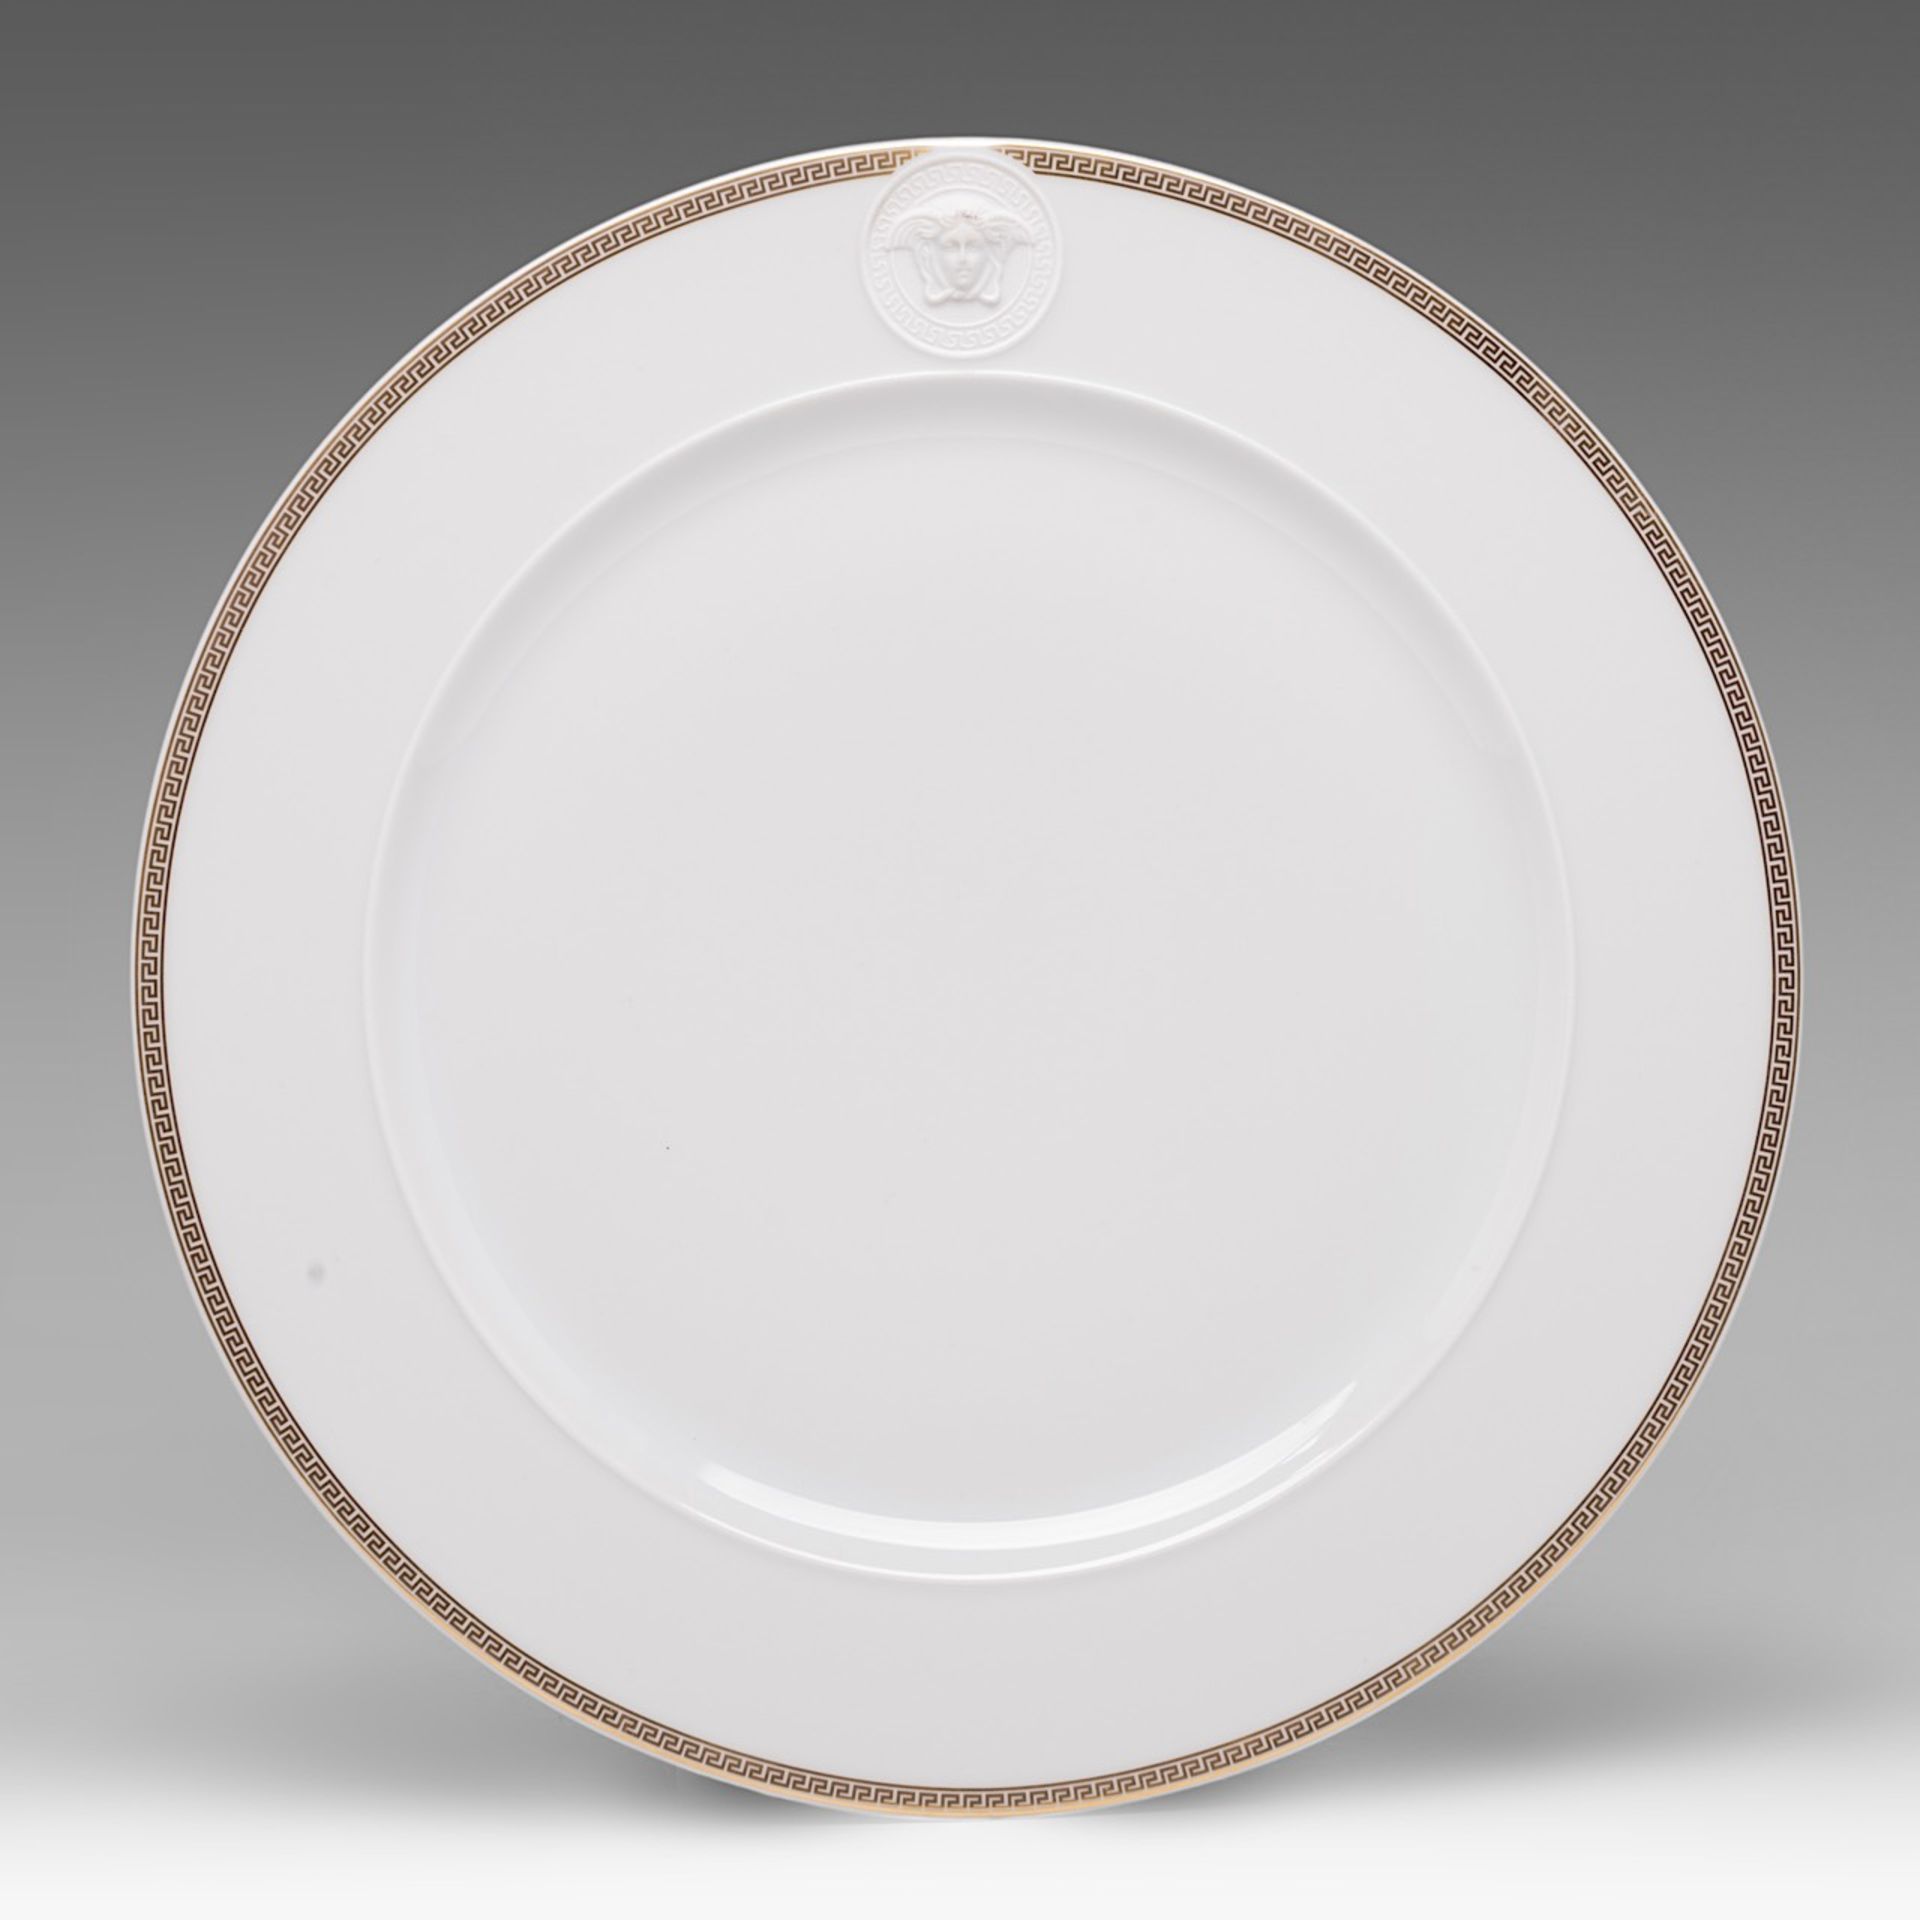 A 68-piece set of Versace 'Ikarus medaillon meandre d'or', porcelain tableware for Rosenthal, added - Image 2 of 11